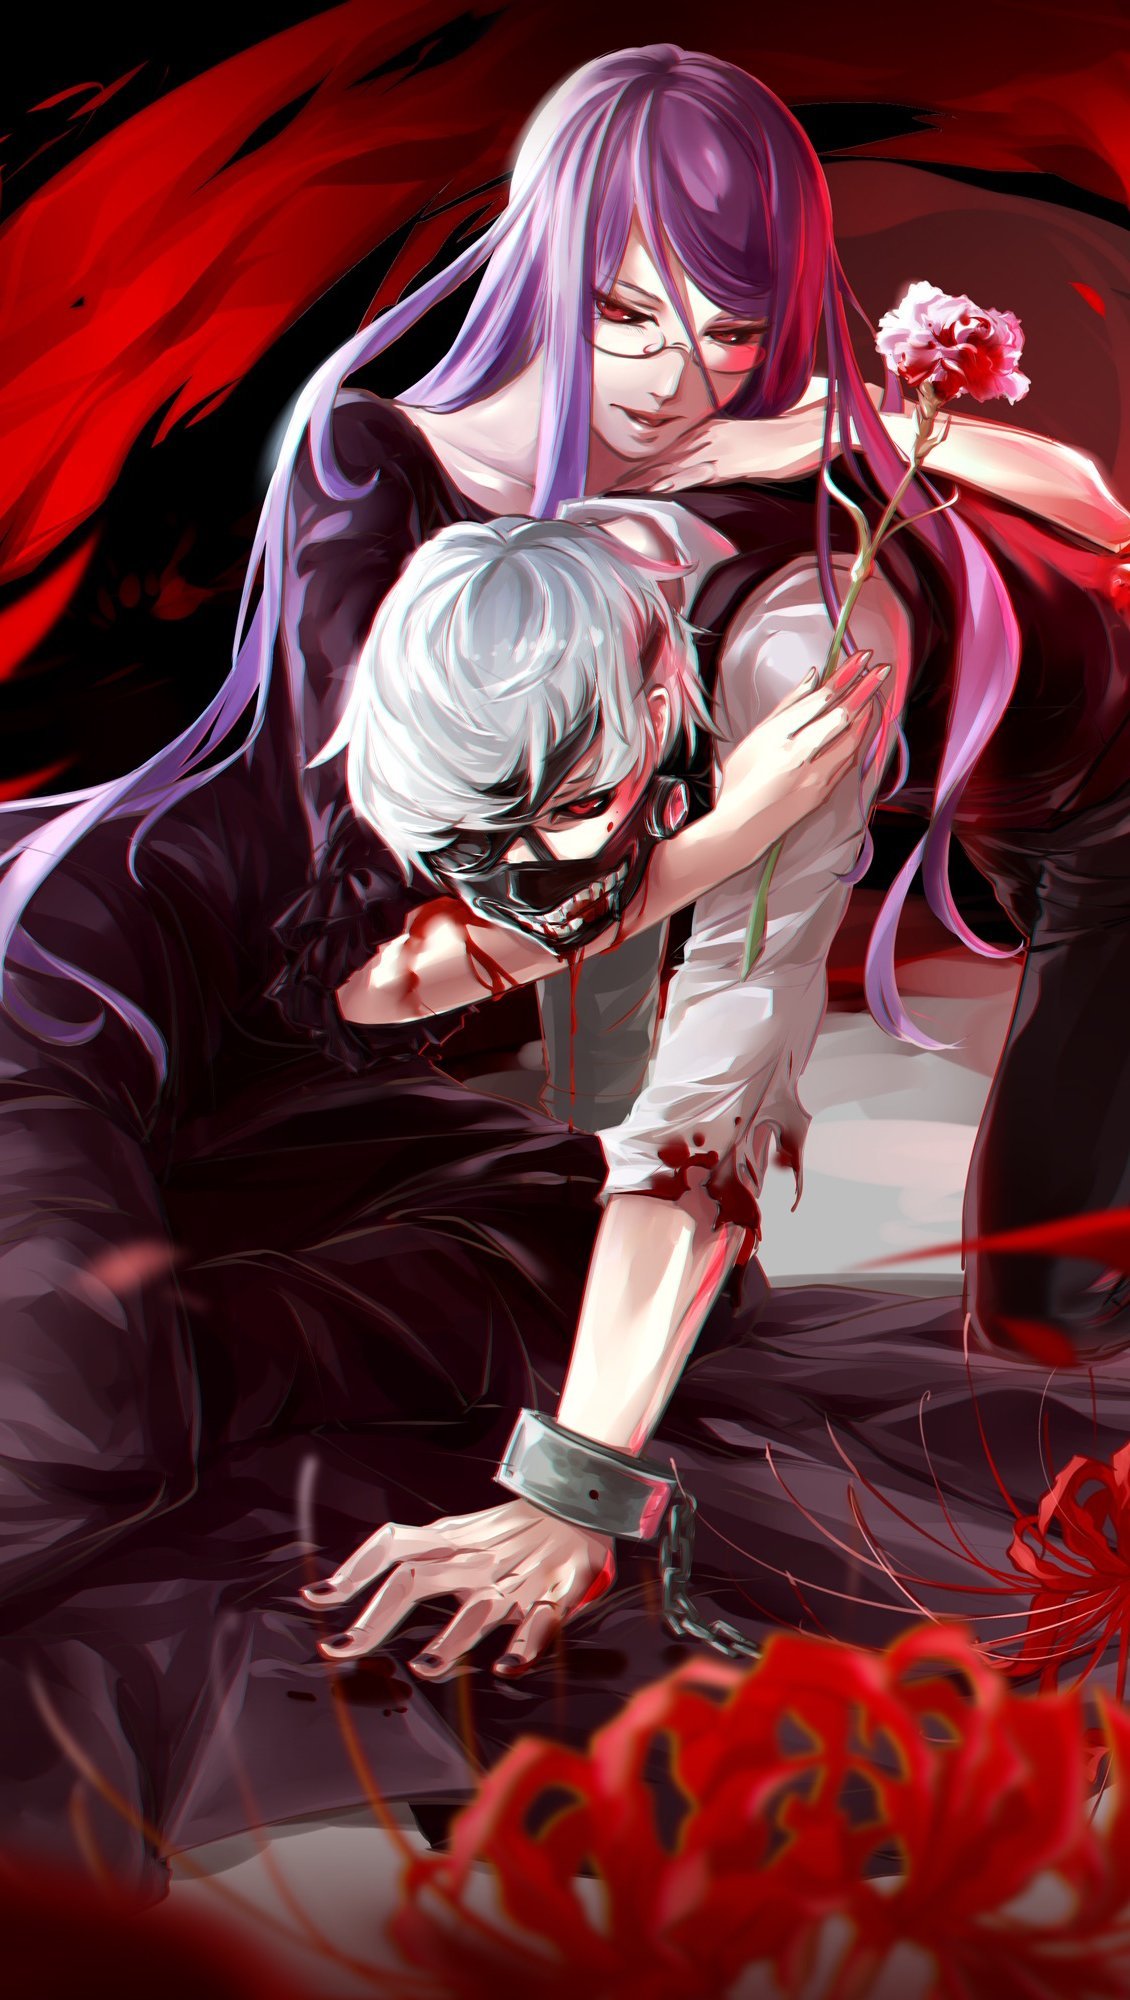 Characters from Tokyo Ghoul Anime Wallpaper ID:4557